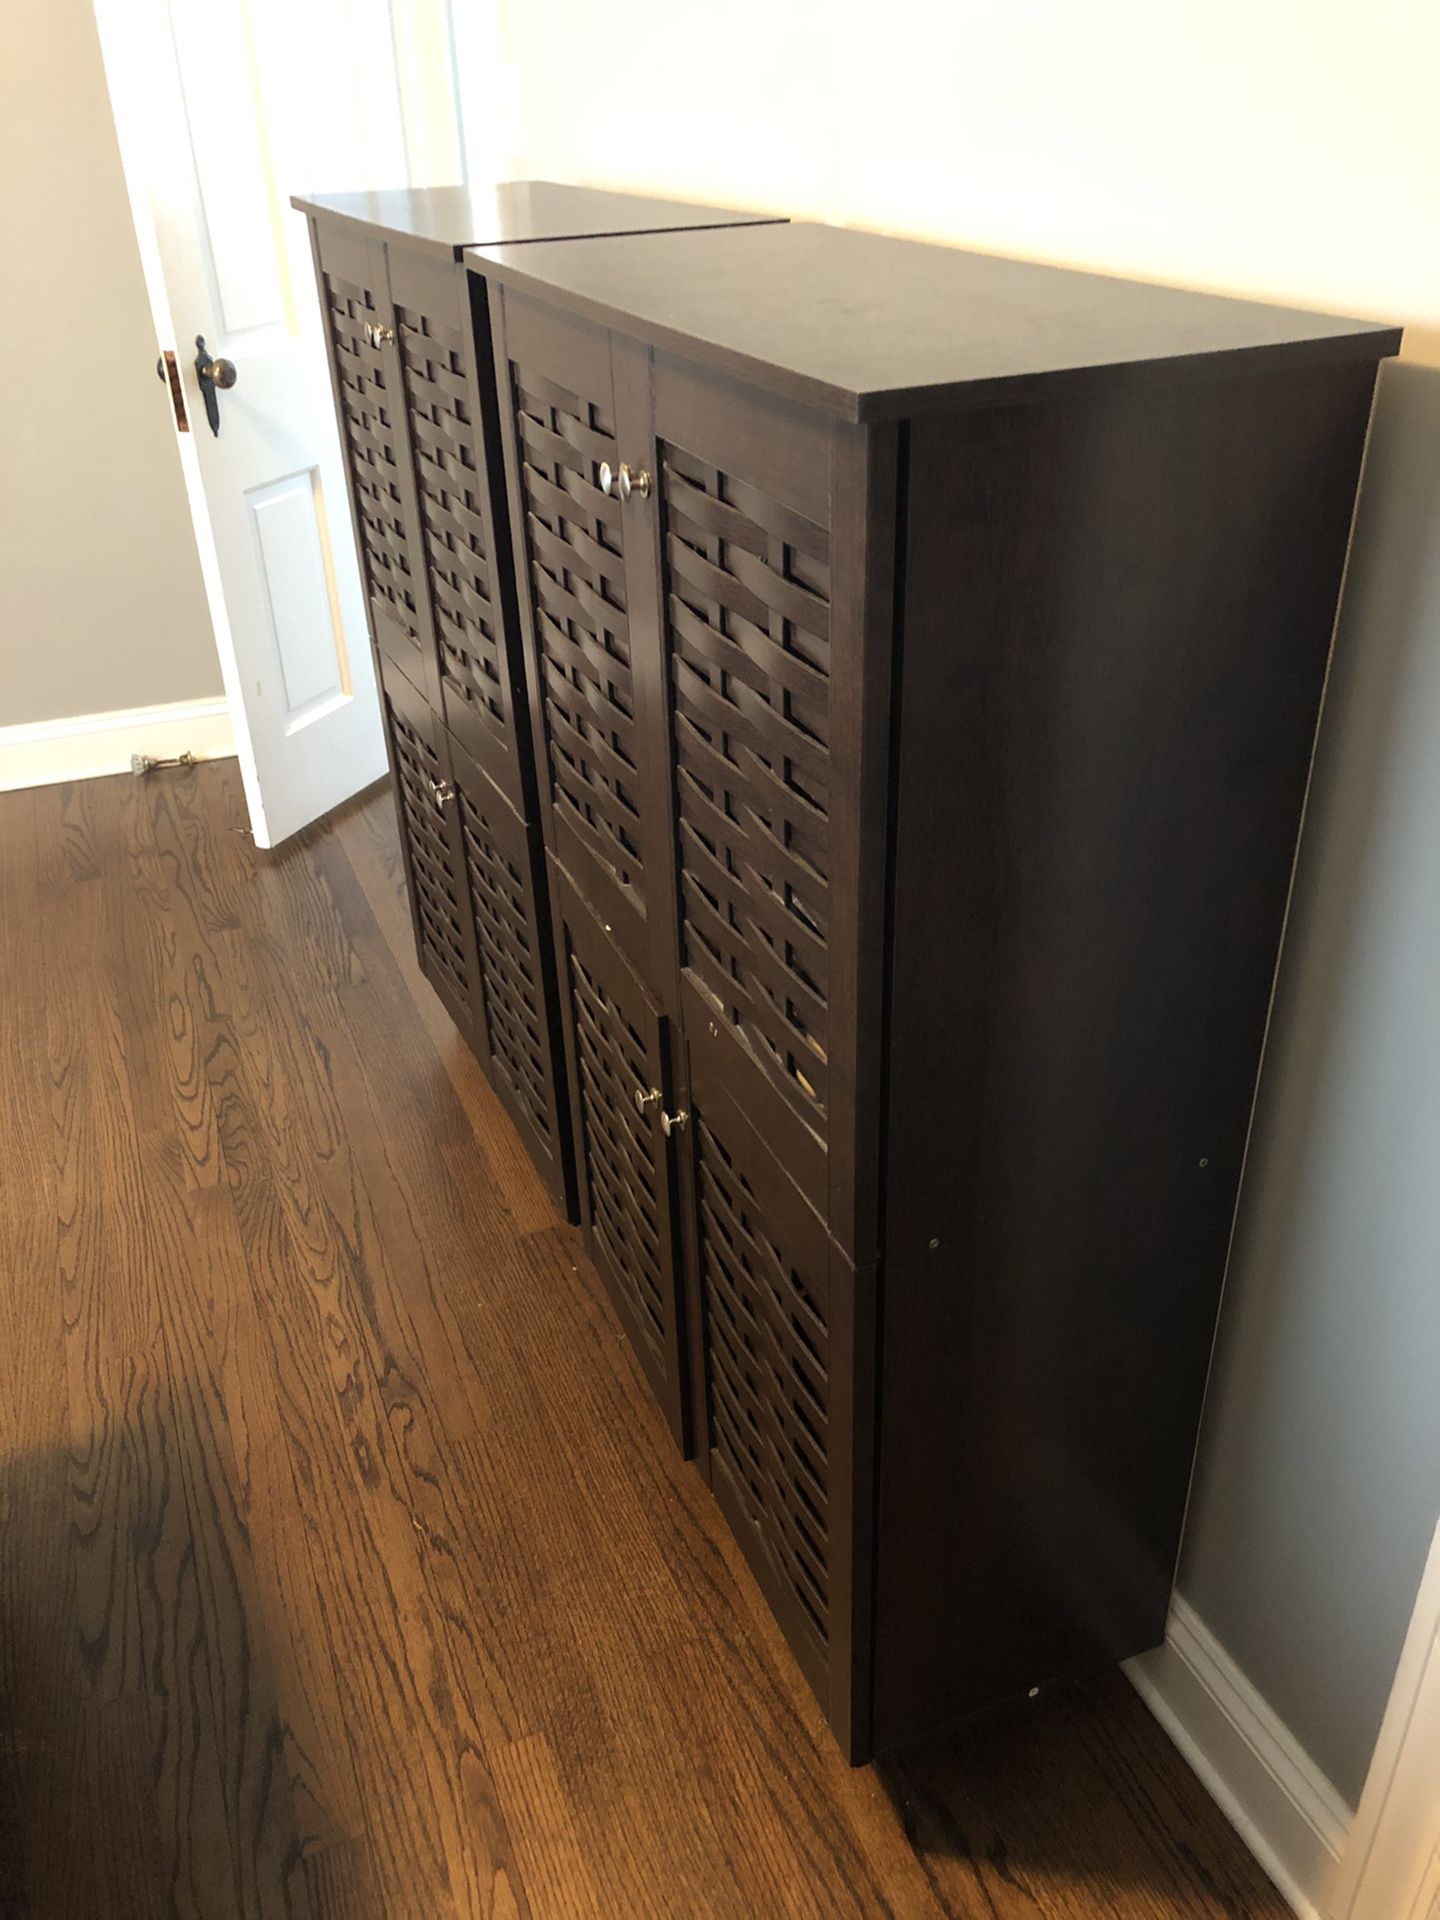 Cabinets for storage!